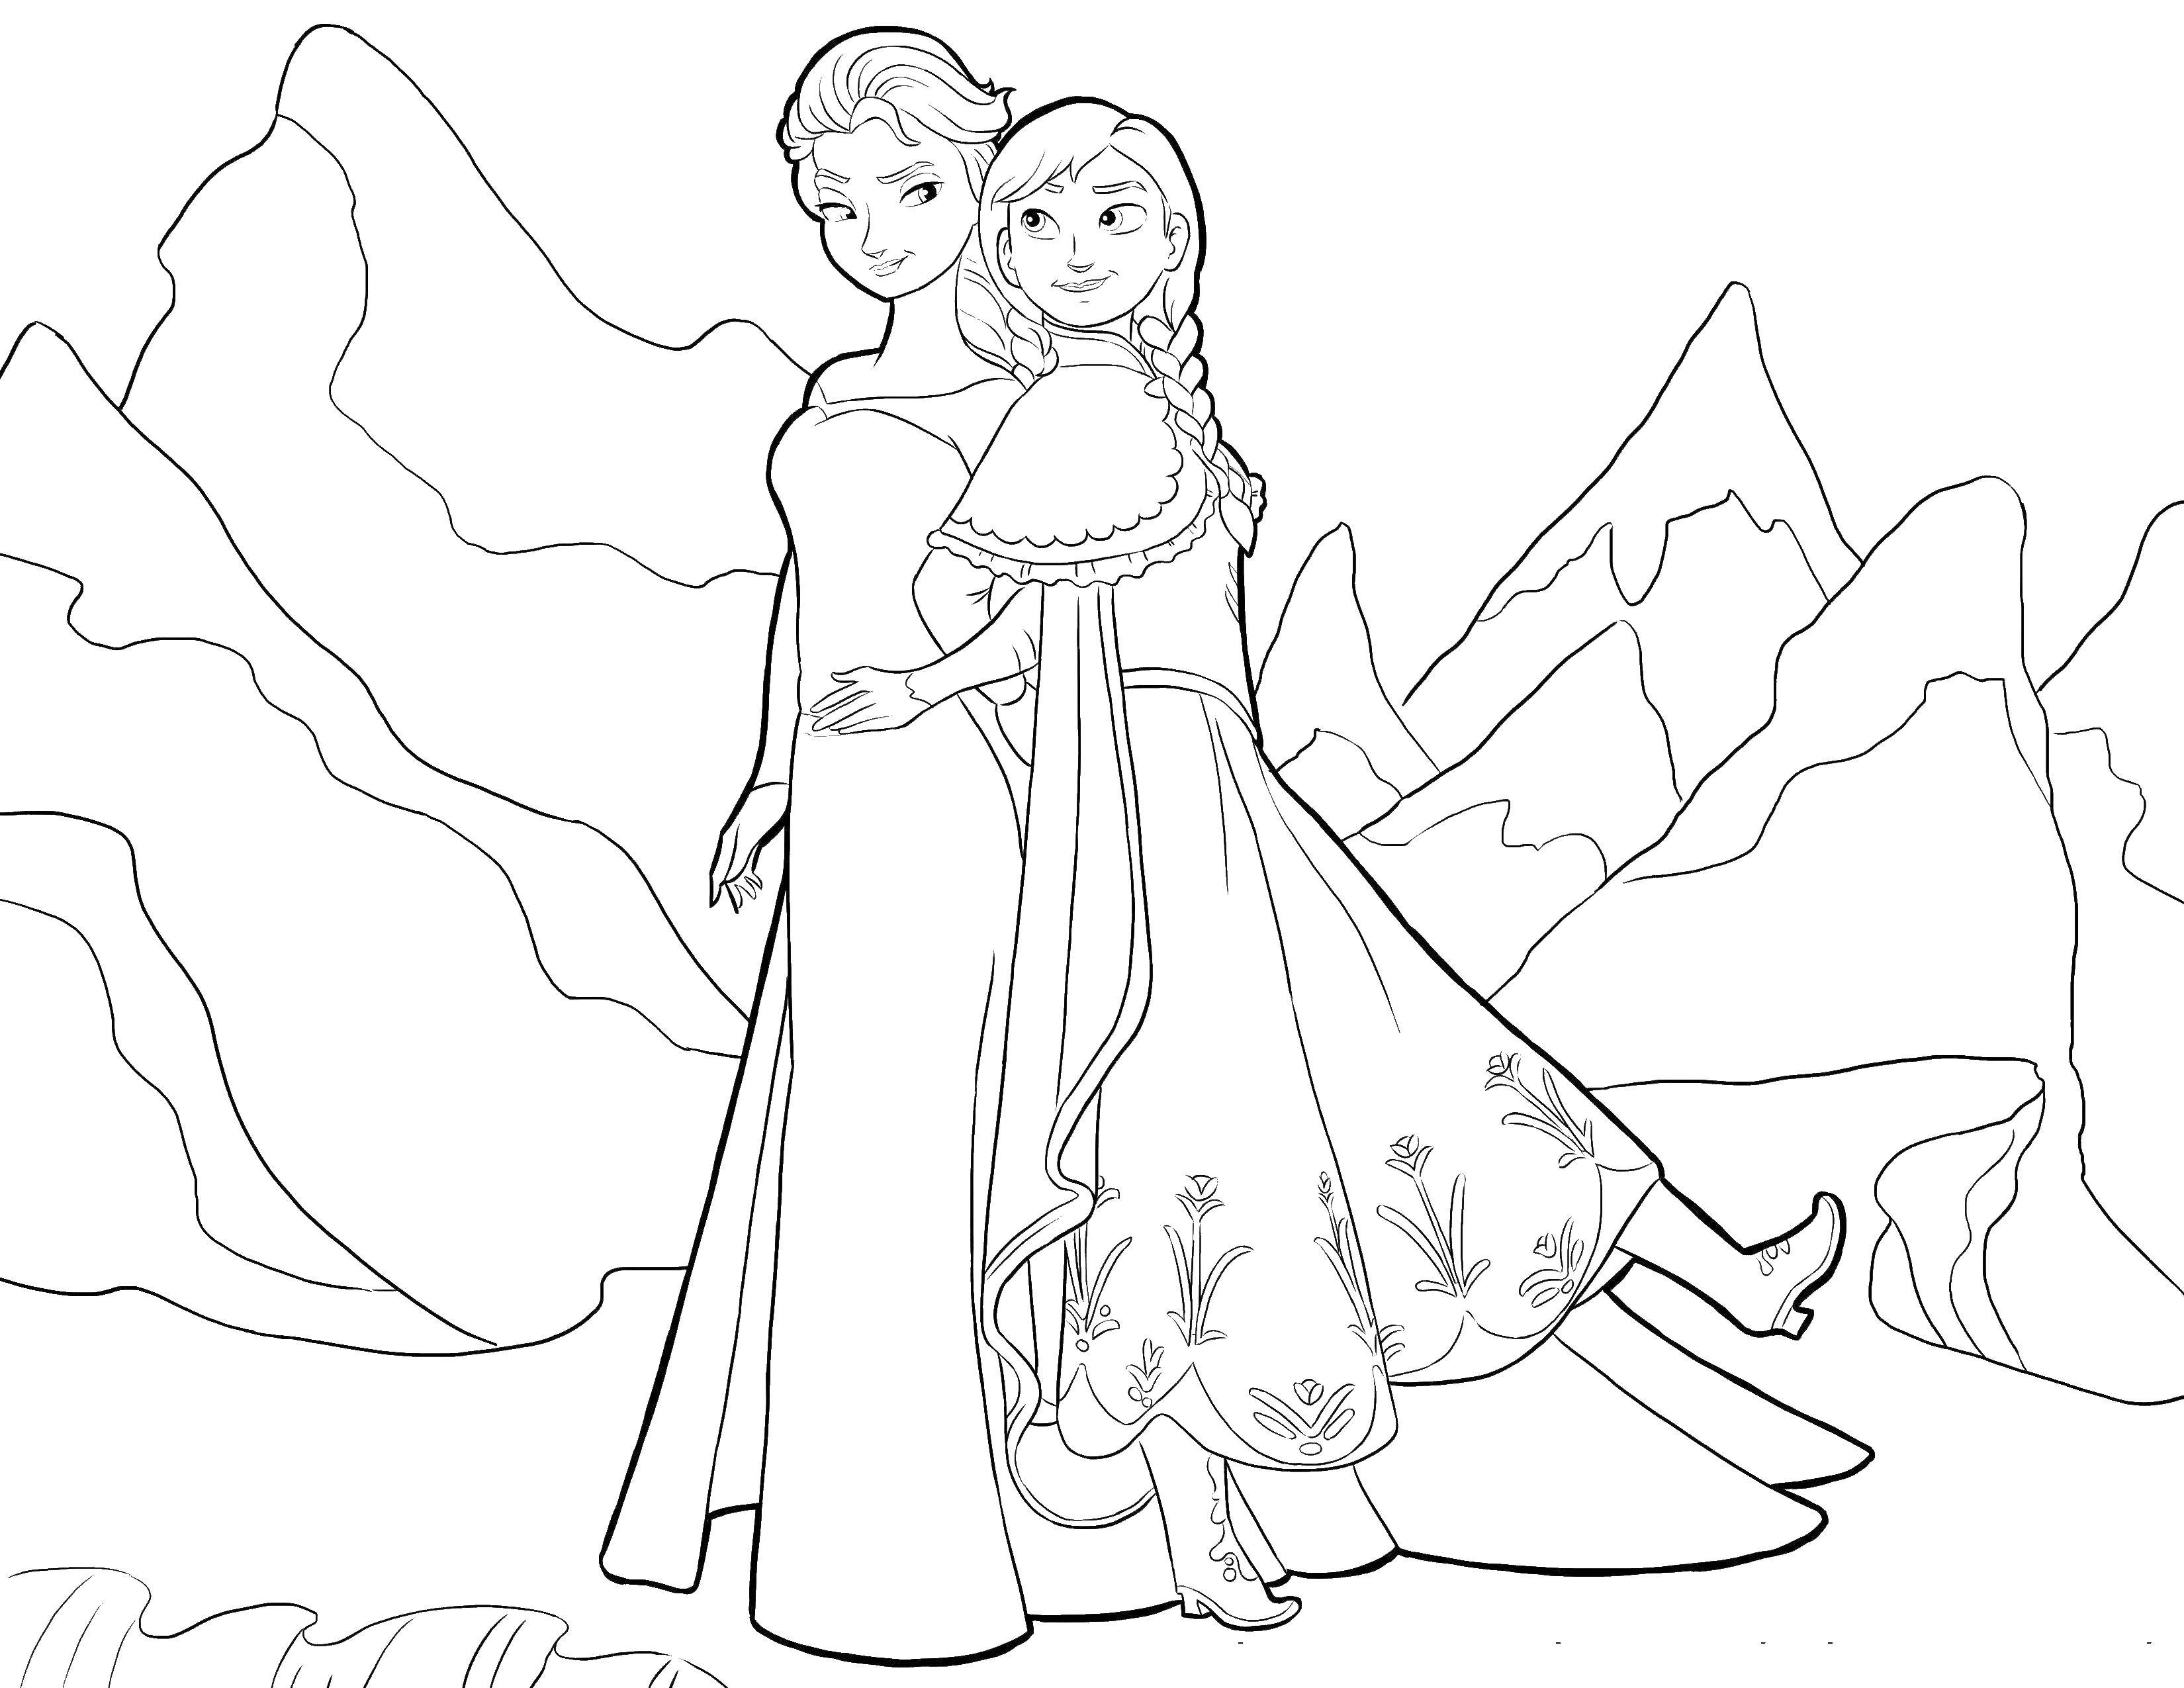 Coloring The Queen and the Princess. Category The Queen. Tags:  Queen, Princess, mother, daughter.